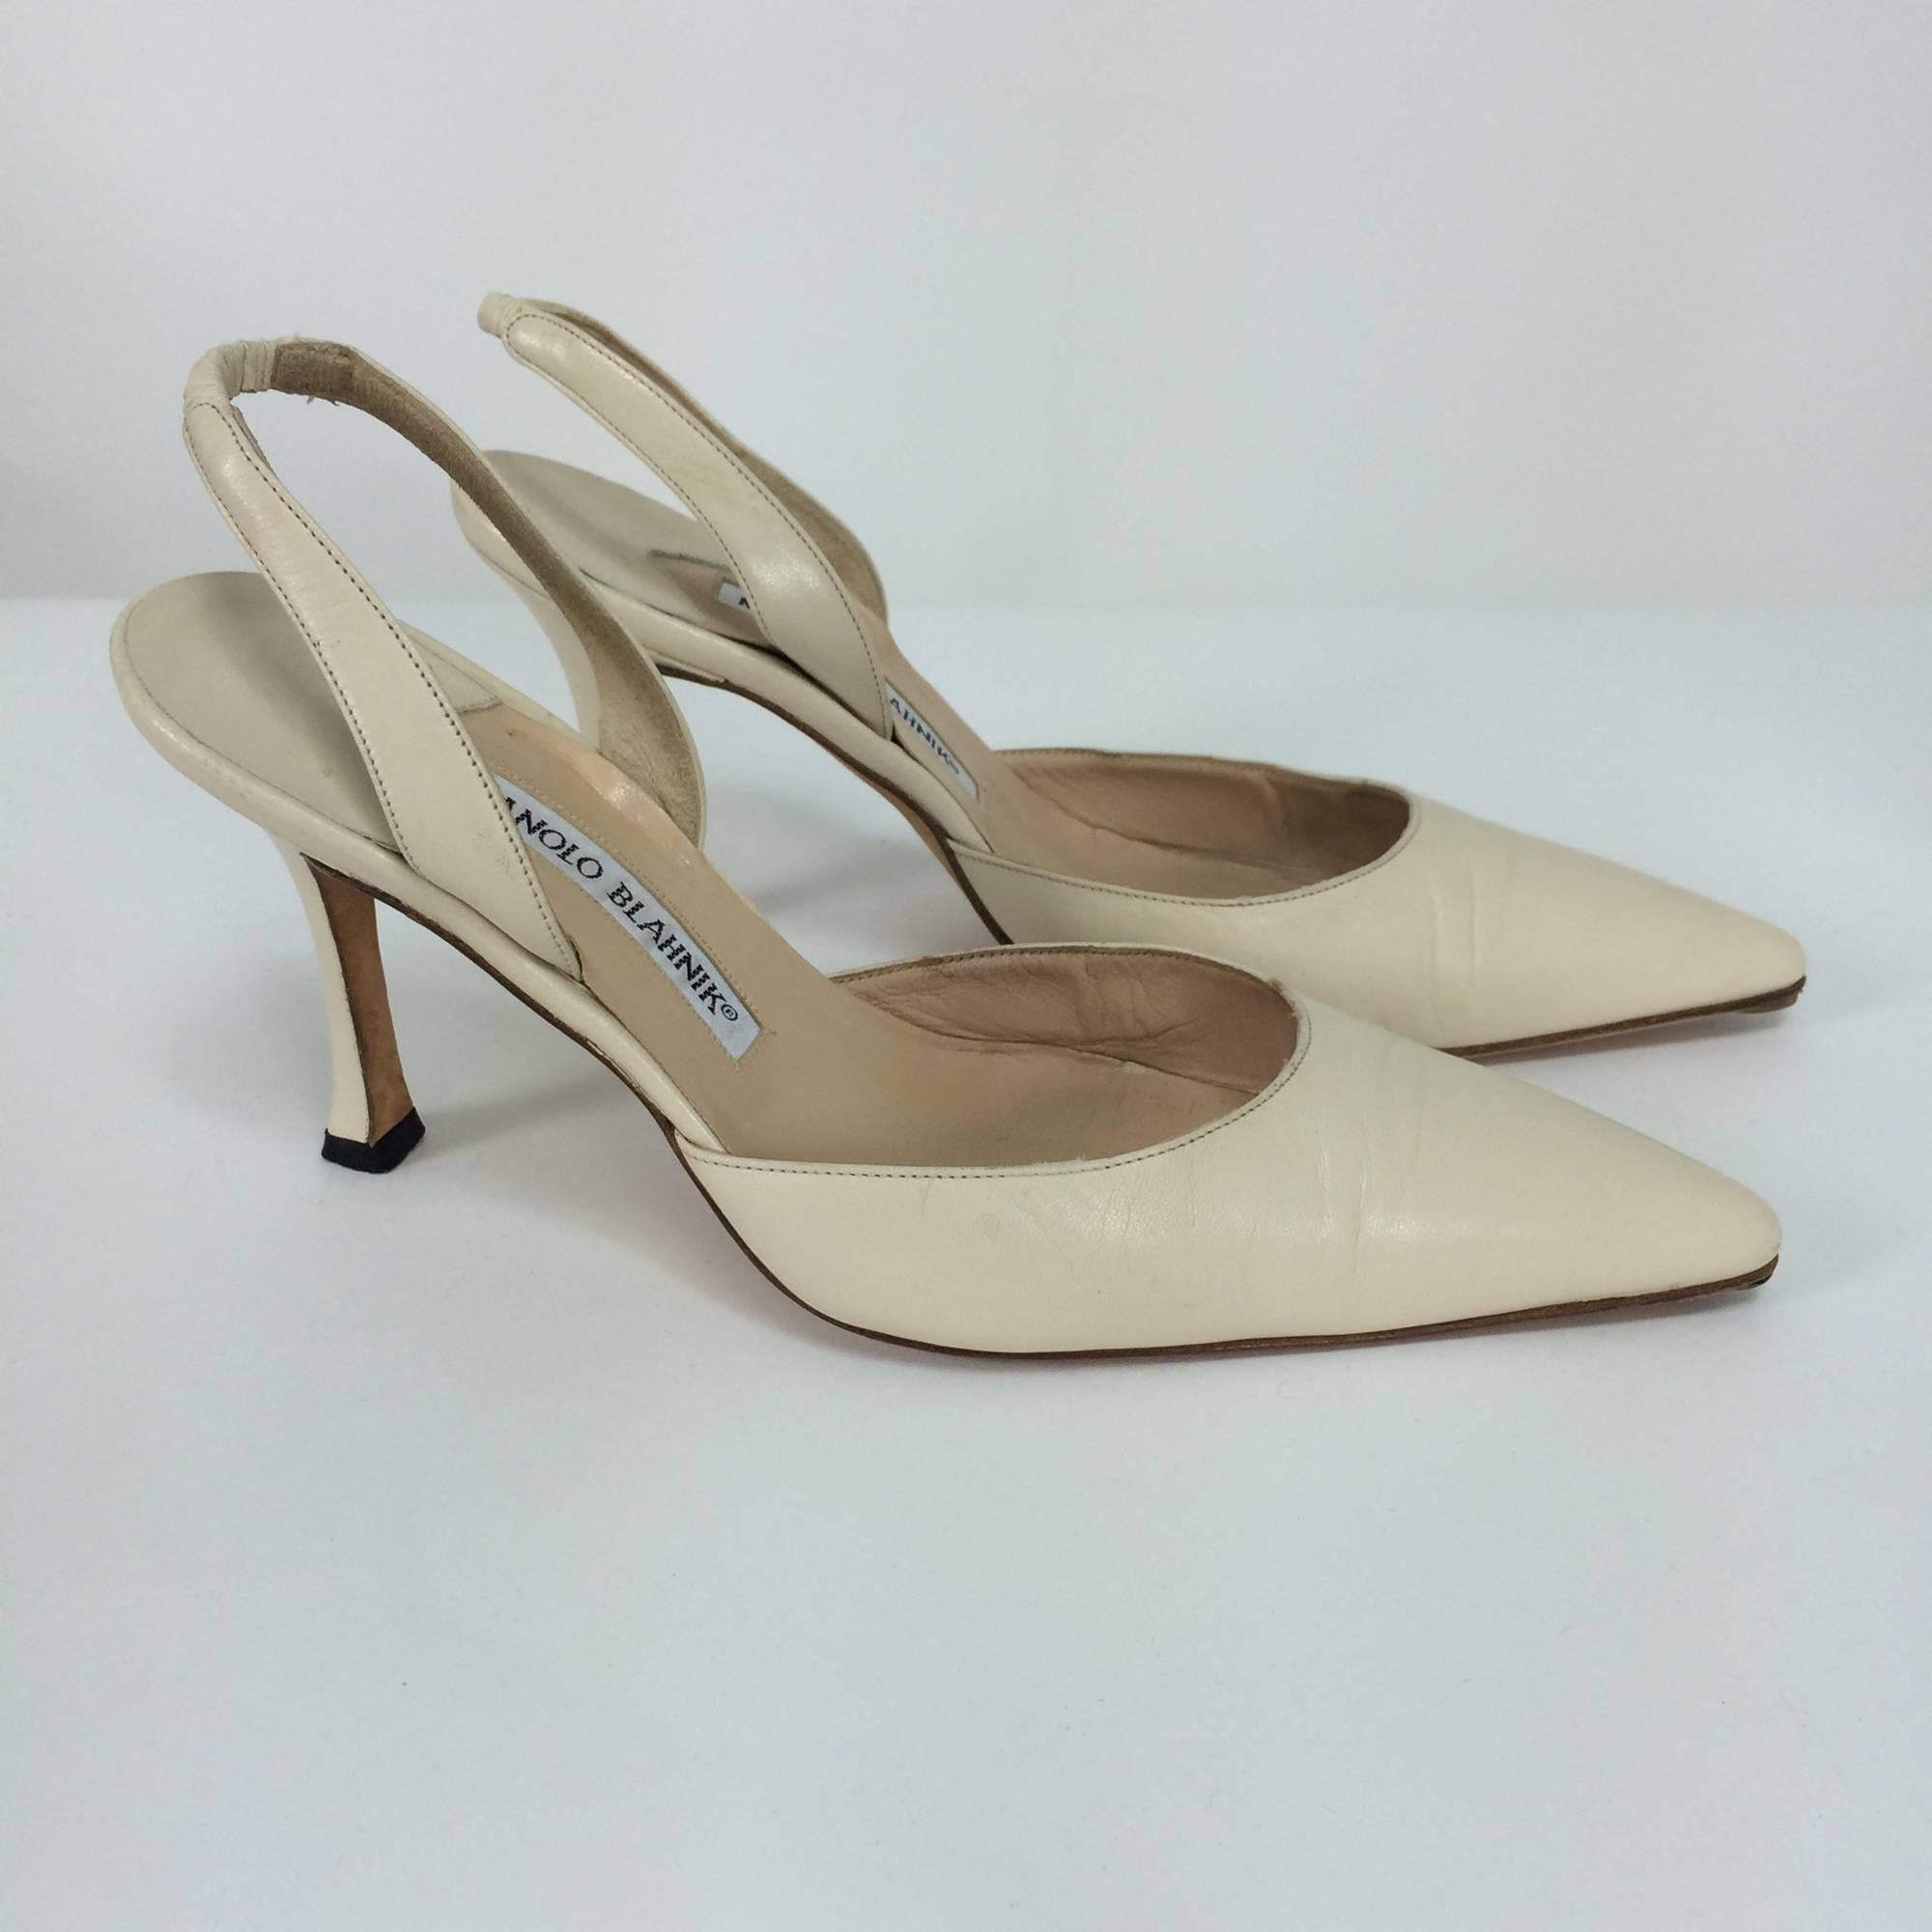 Manolo bone leather sling back high heel pumps 36 1/2 M...Classic& will go with just about anything, in excellent condition. 3 1/2